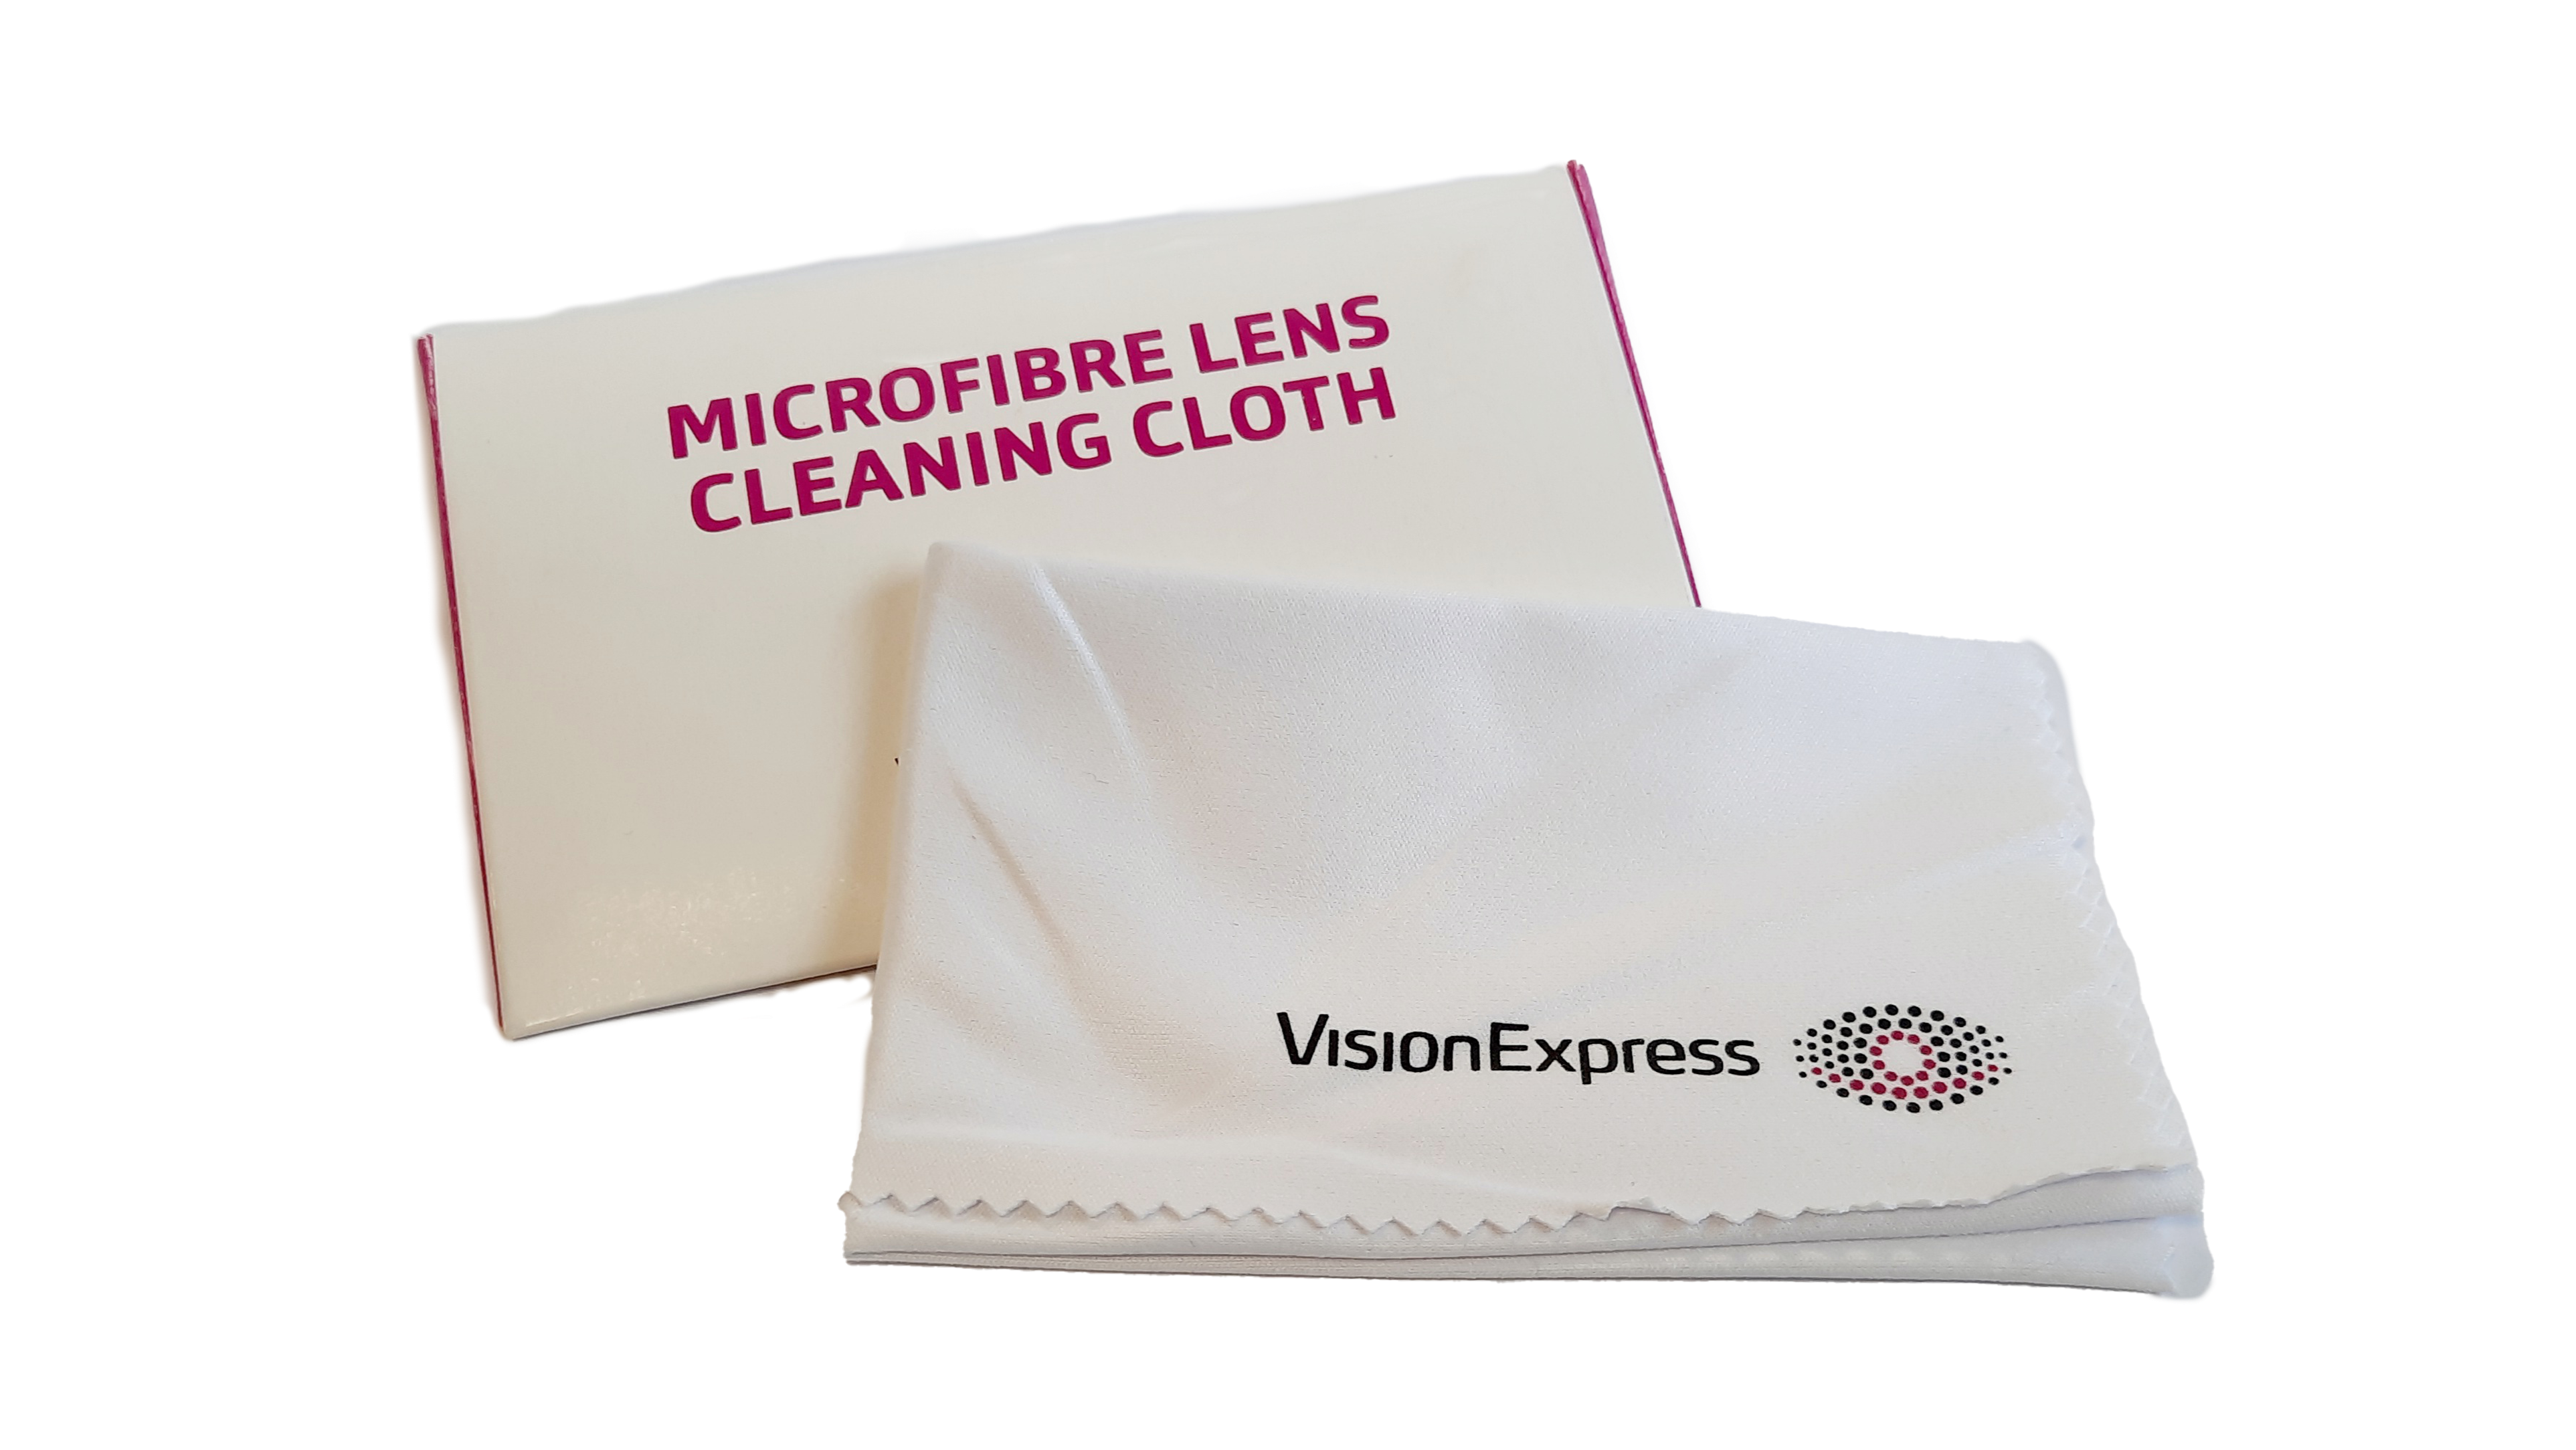 Front Vision Express Microfibre Lens Cleaning Cloth